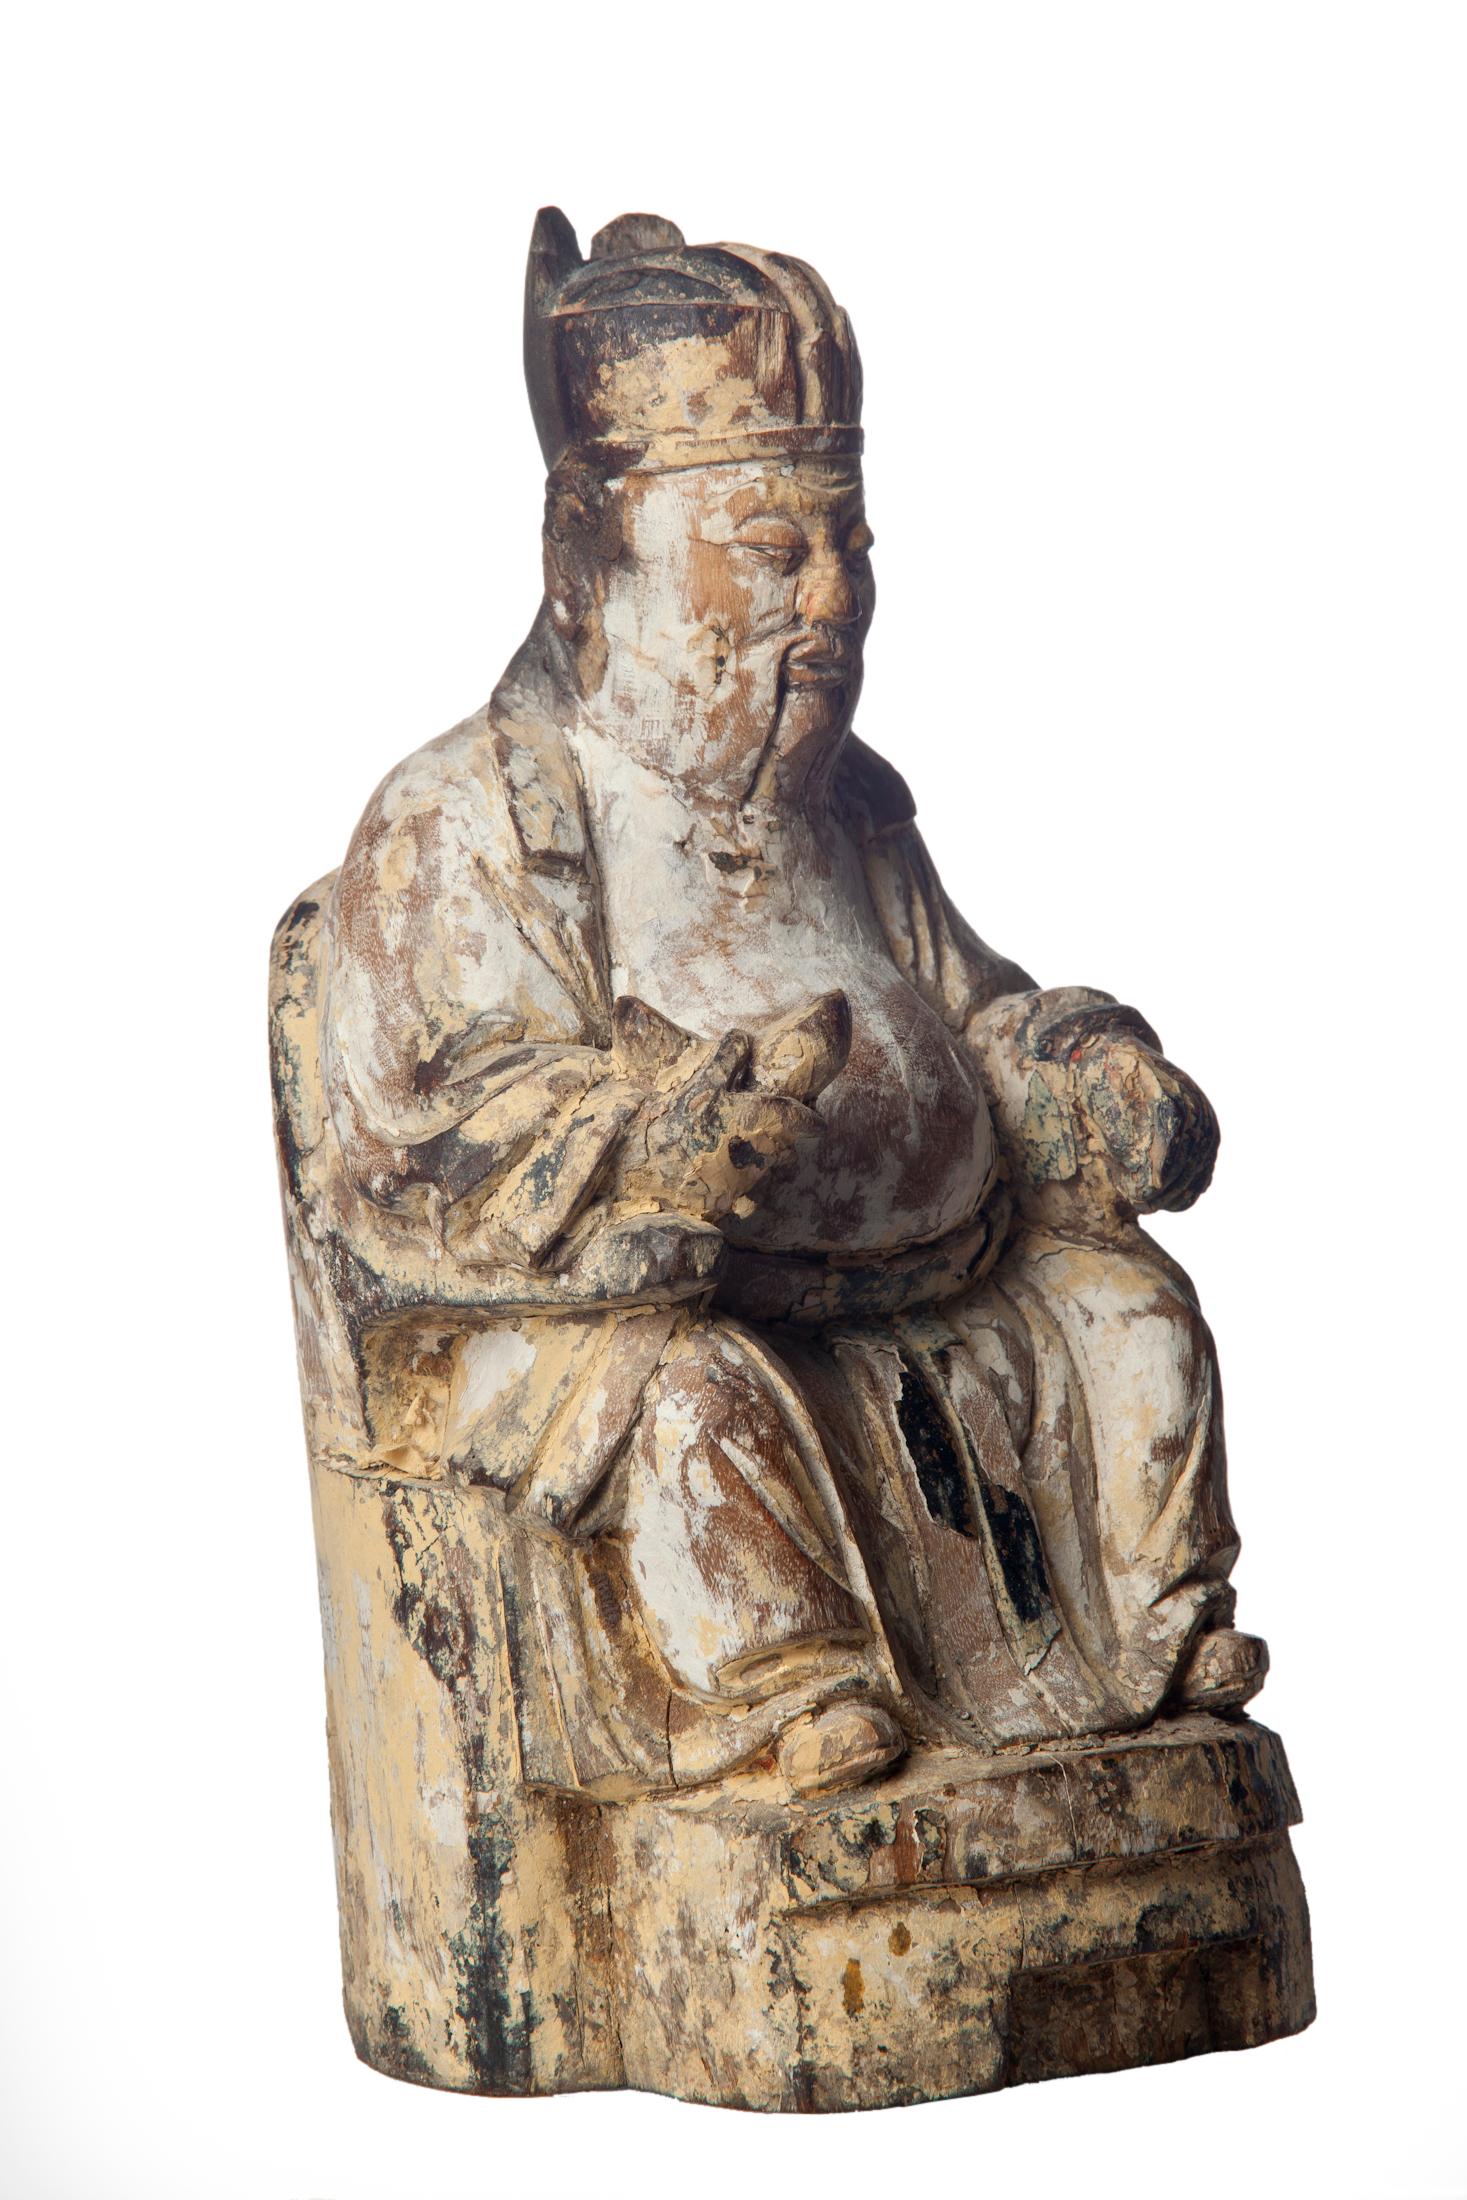 This one-of-a-kind hand-carved antique wood buddha is certified to be over 180 years old and sits 9